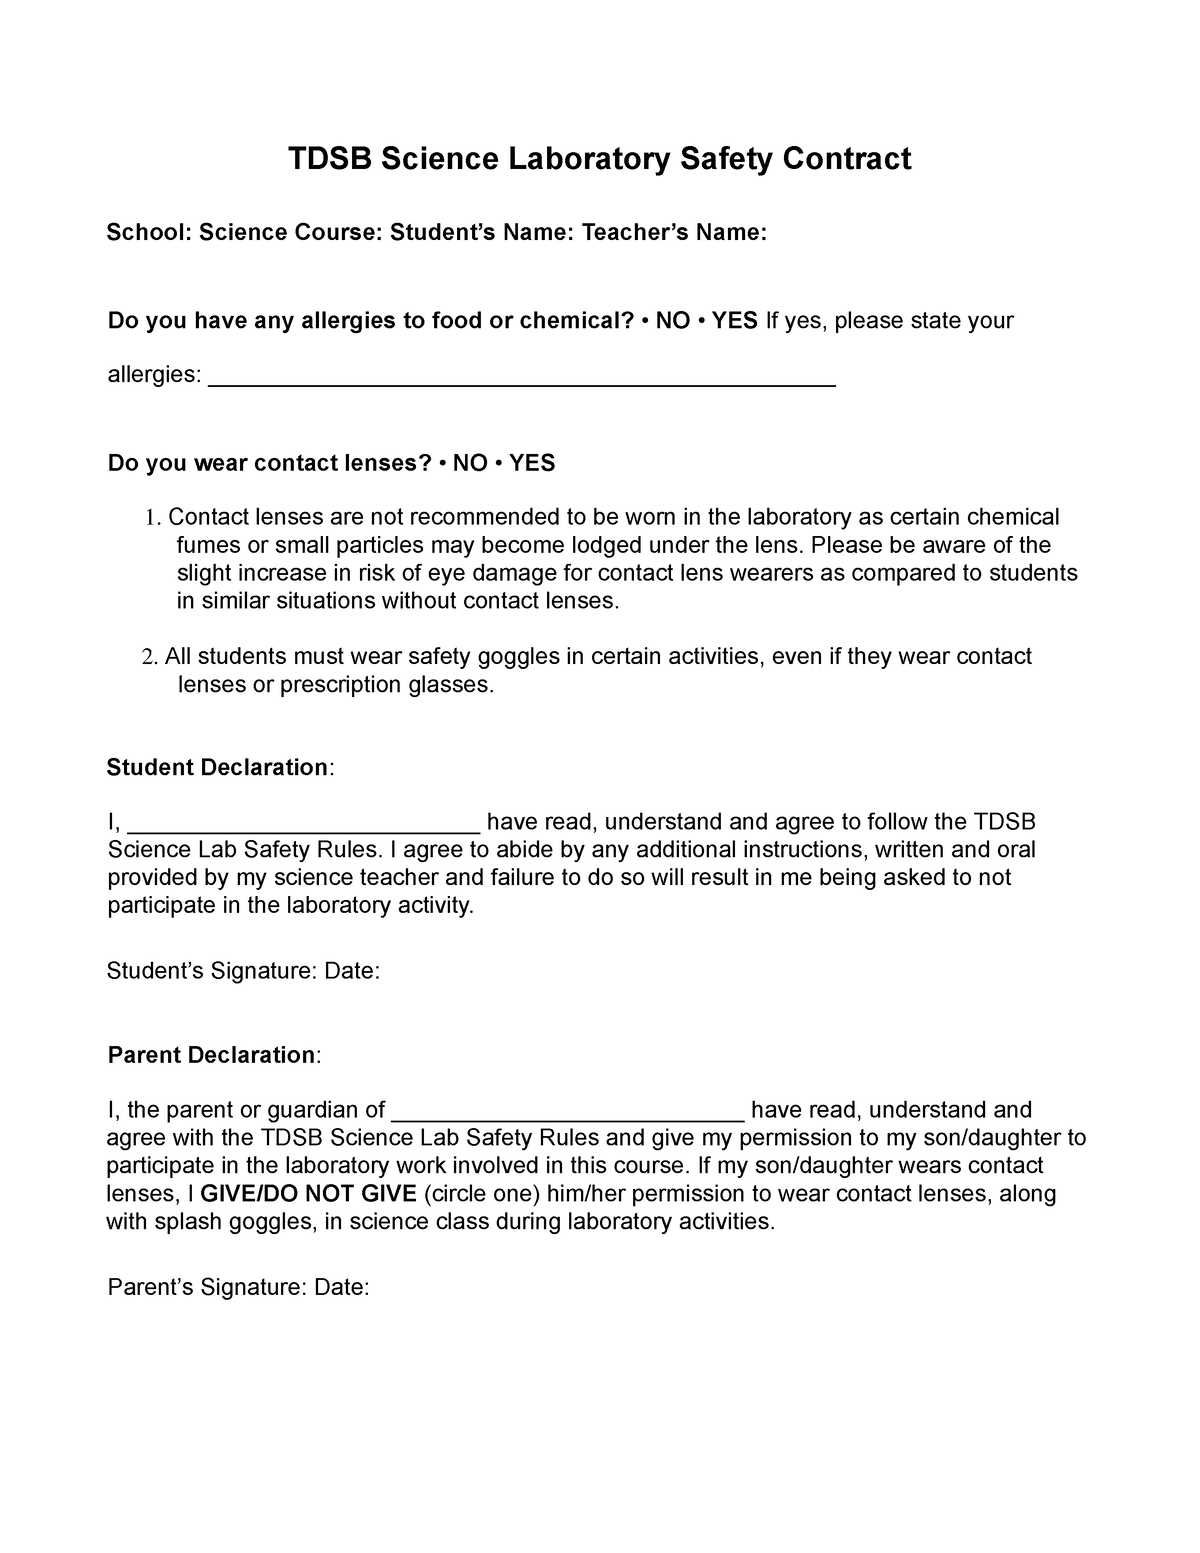 Science worksheets: Safety clothes worn in a science lab